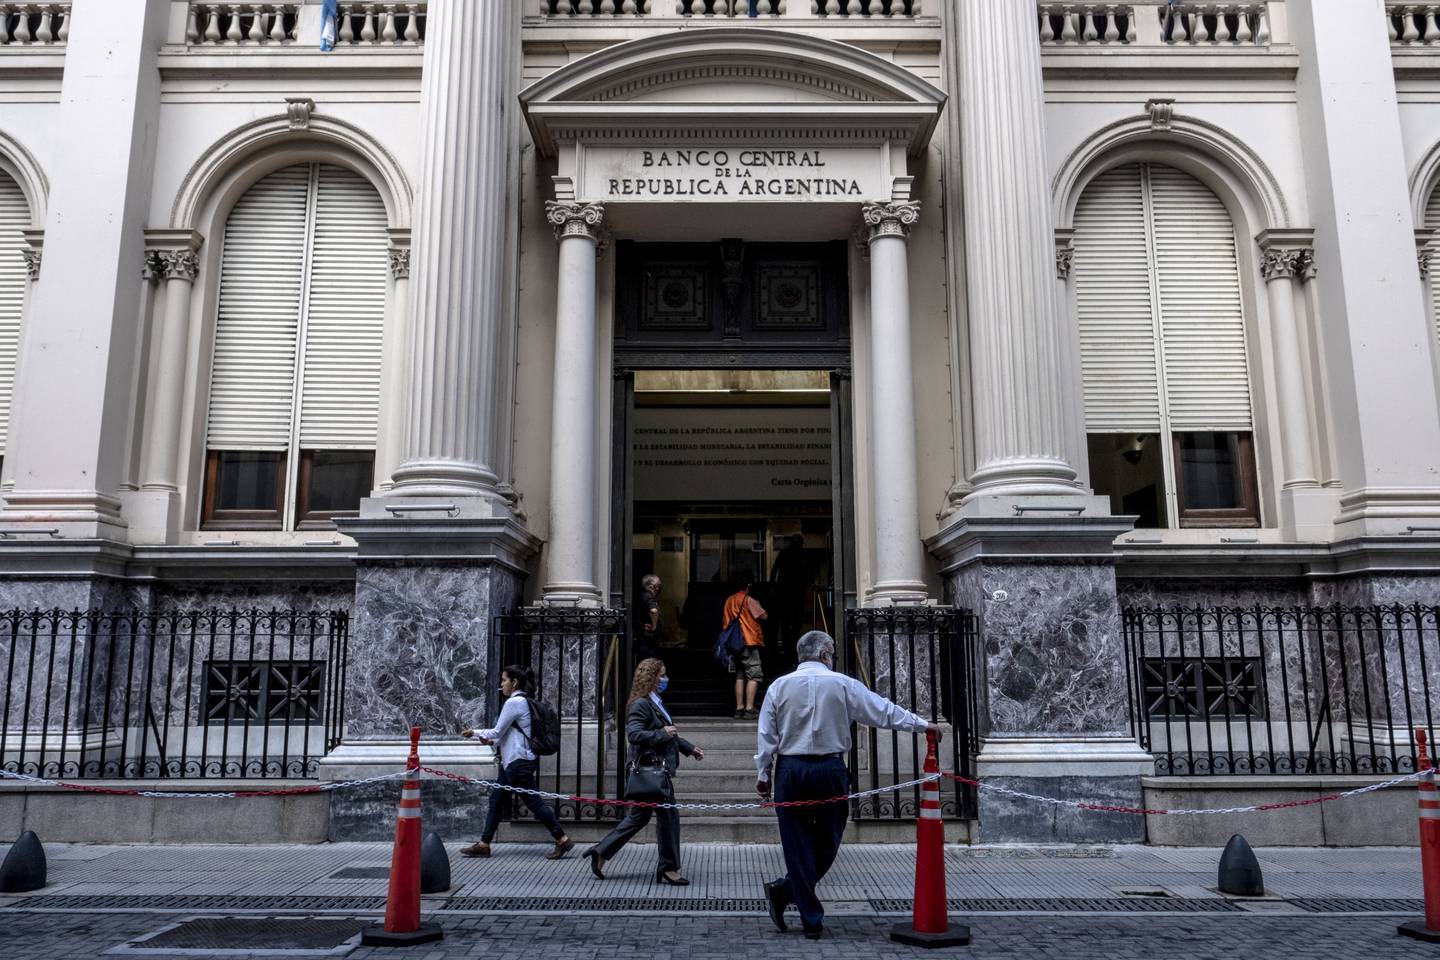 Argentina's Central Bank building in Buenos Aires